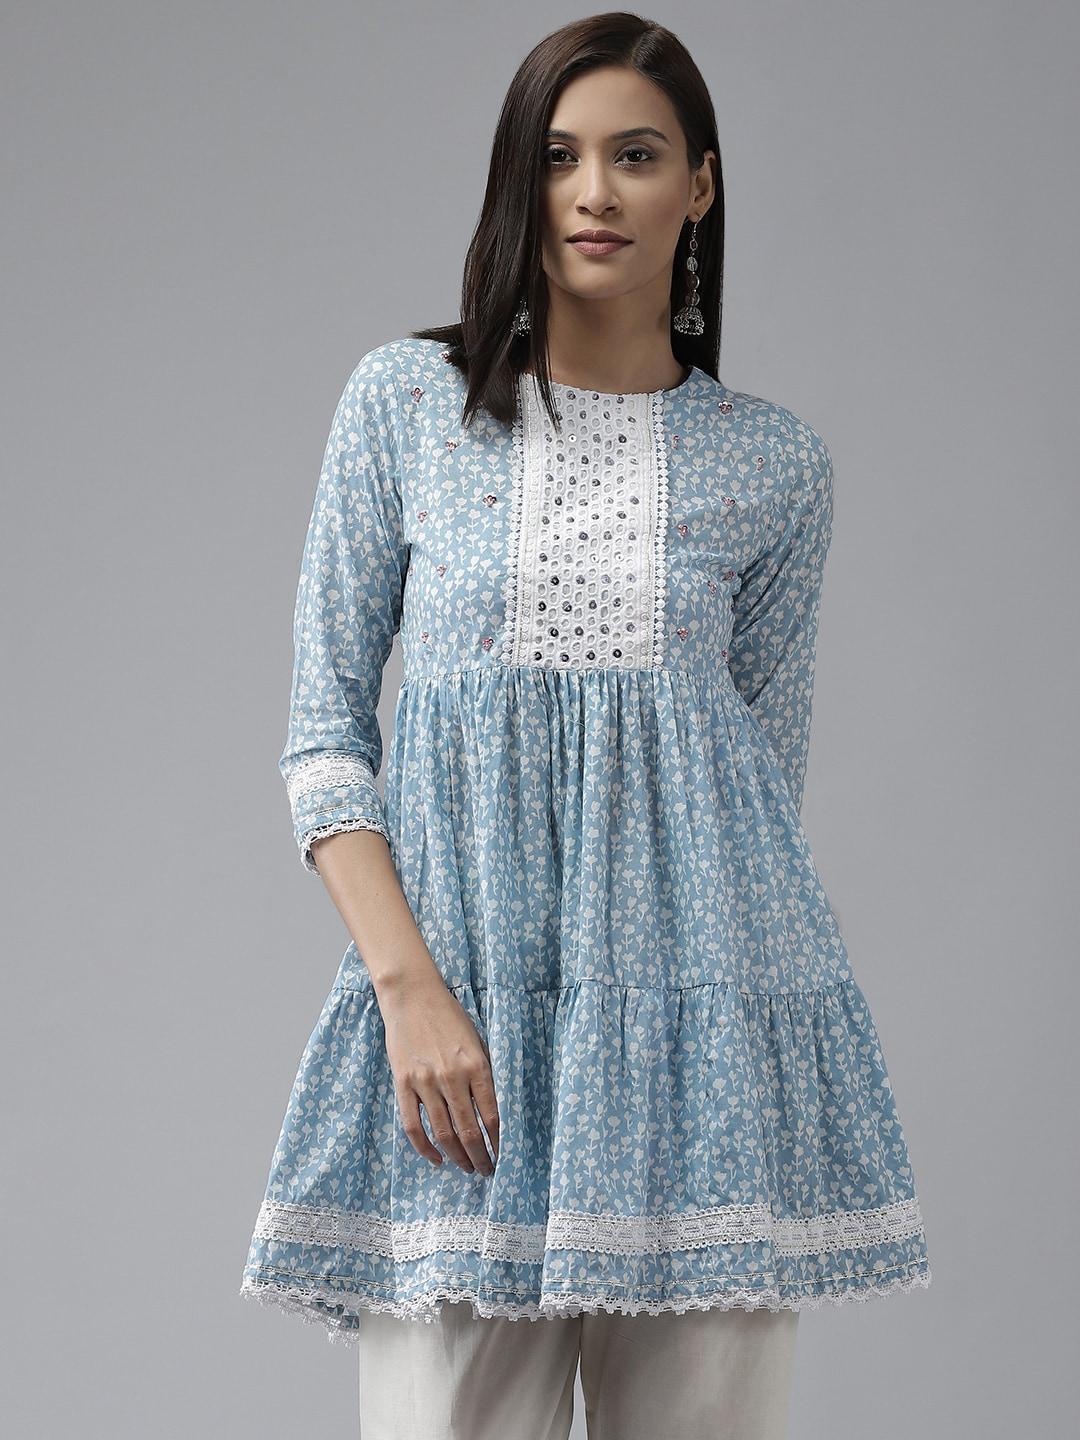 Amirah s Blue & White Ethnic Motifs Printed Lace Inserts Pleated Pure Cotton Tunic